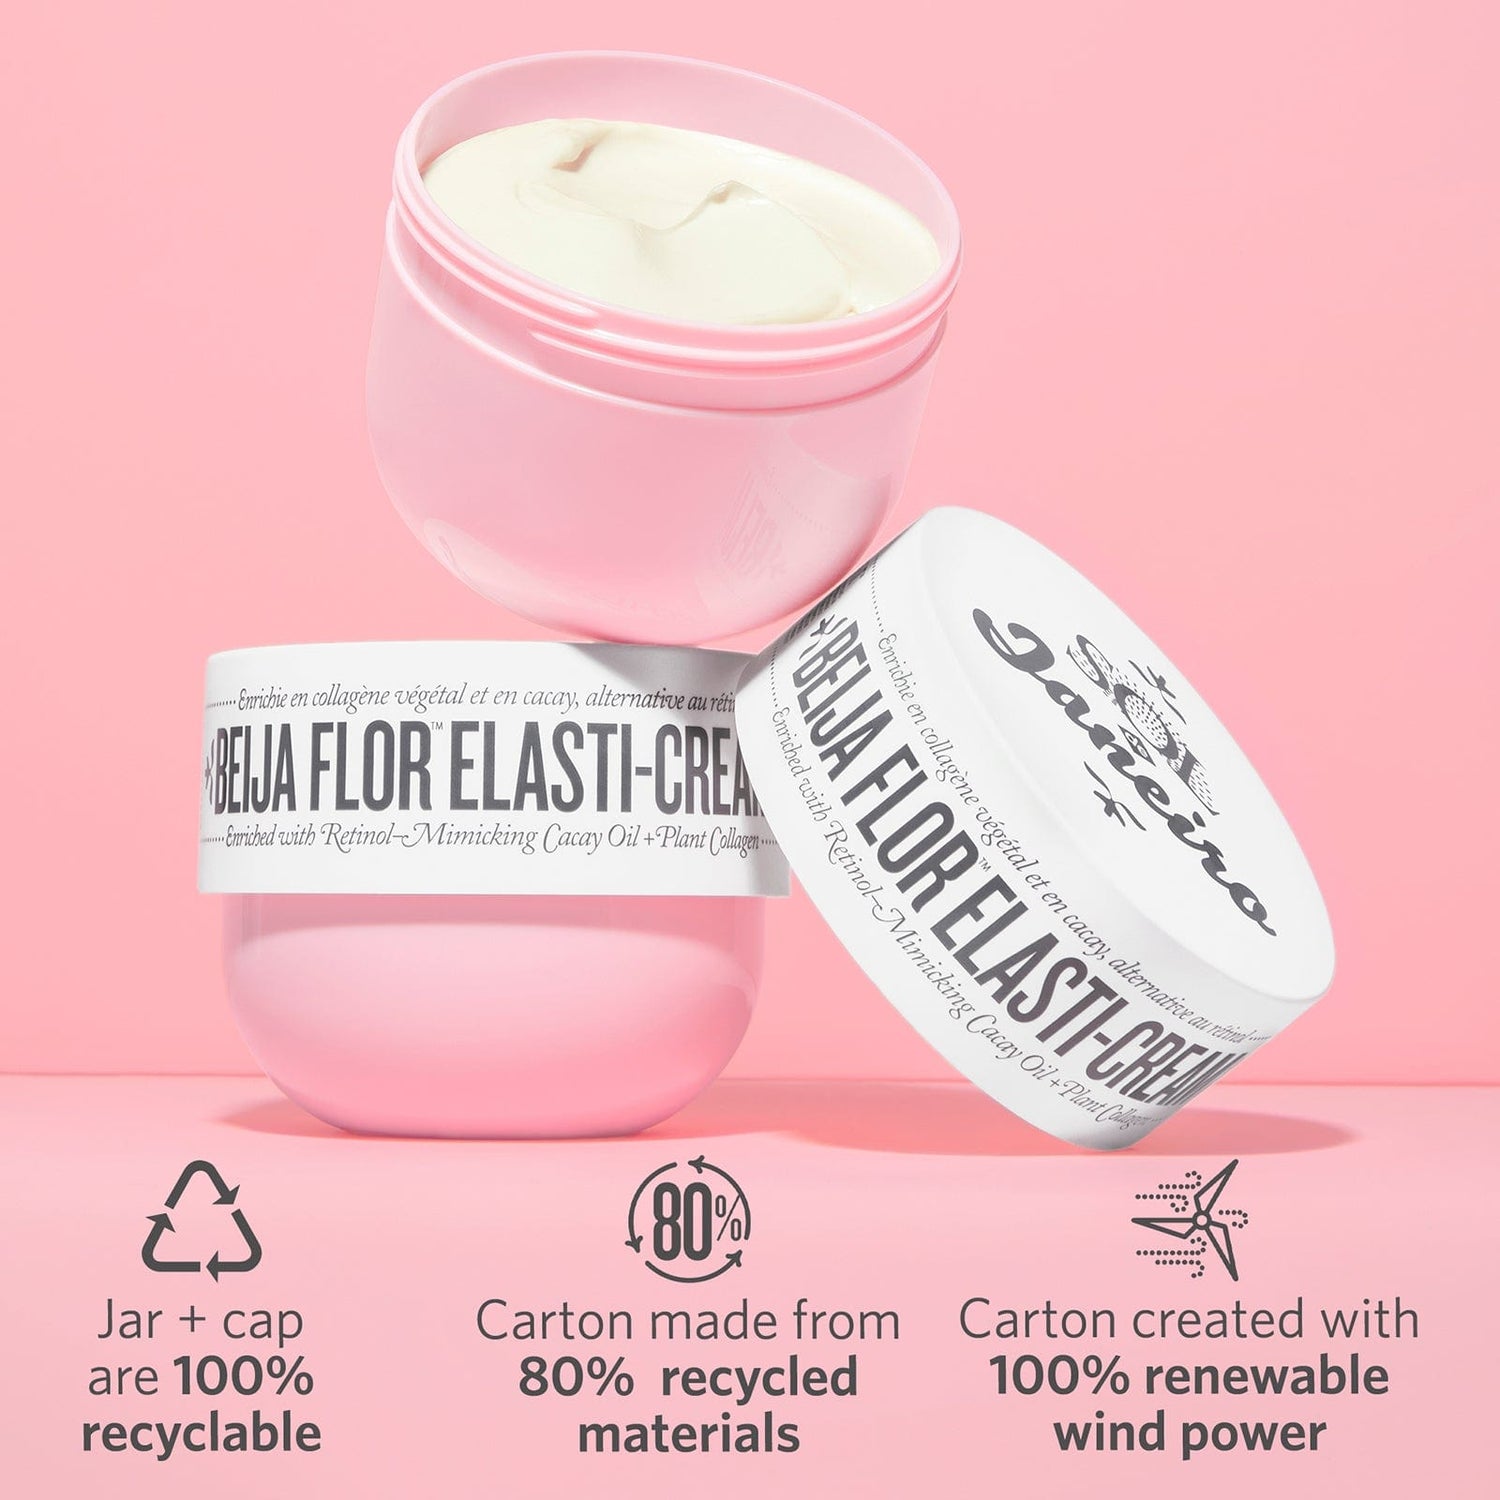 jar and cap are 100% recyclable | carton made from 80% recycled materials | Carton created with 100% renewable wind power | Beija flor elasti-cream | Sol de Janeiro